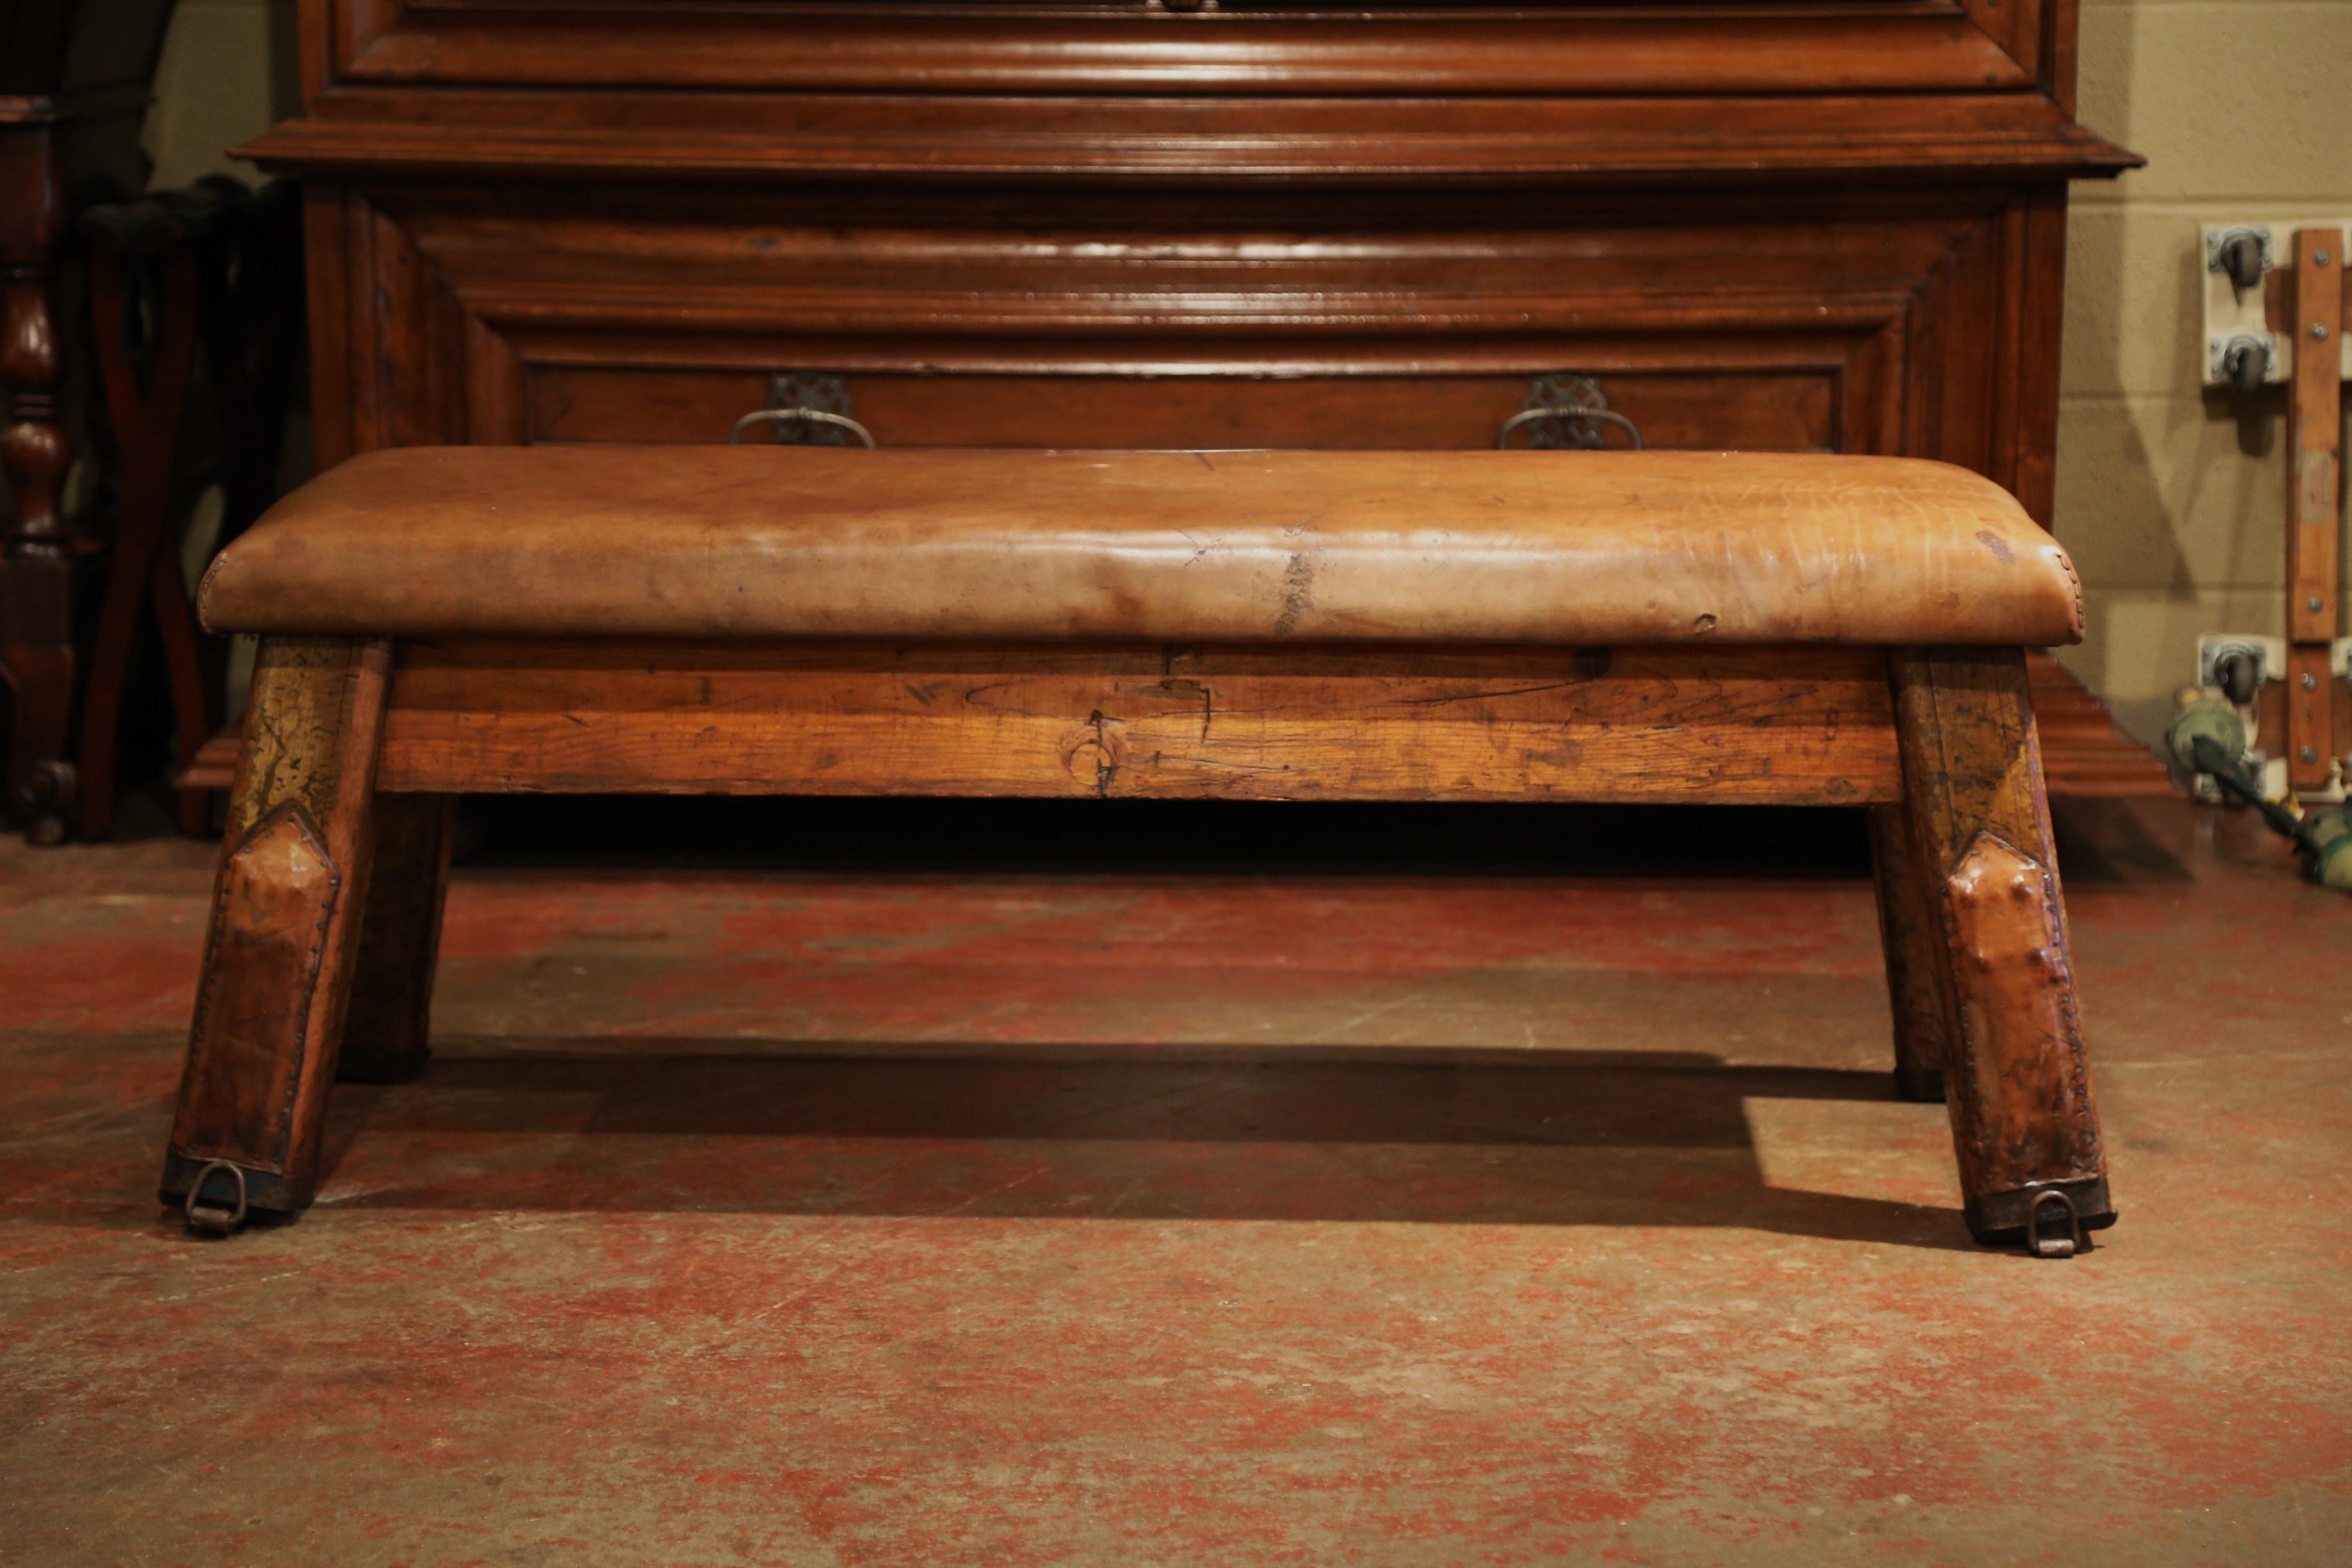 This antique leather bench was crafted in the Czech Republic, circa 1920. The rustic exercising seat features four angled wooden legs recovered with brown leather. The rounded, original top is also covered with a nicely aged leather upholstery. This